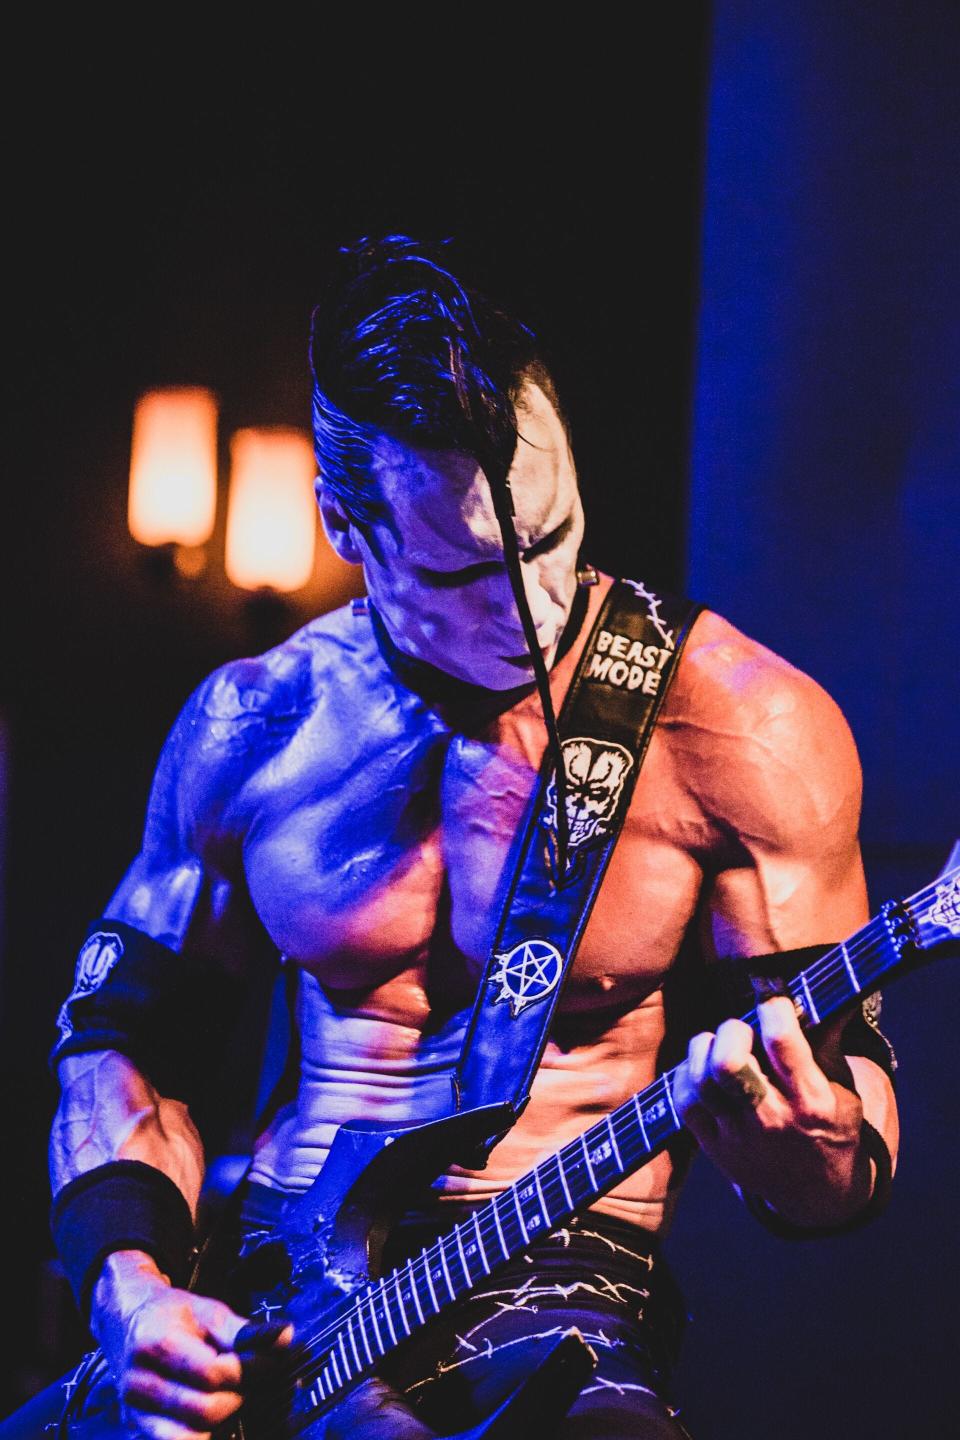 Doyle is the former guitarist for legendary punk band The Misfits.